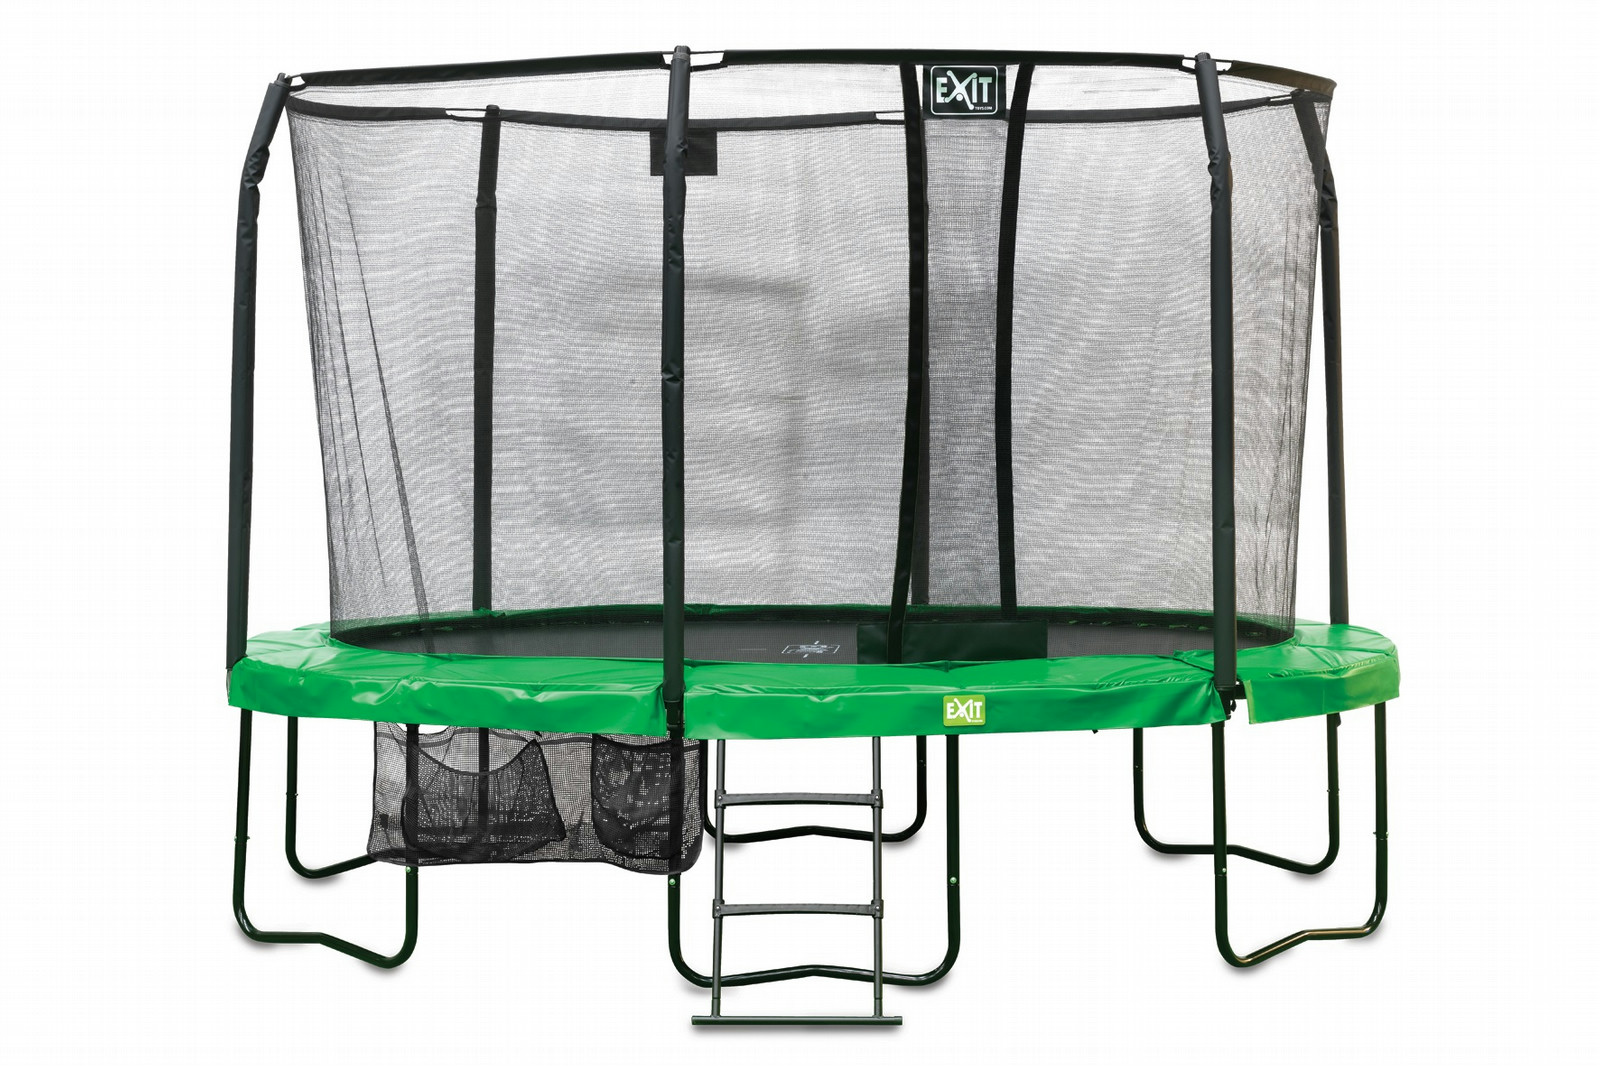 ᐈ EXIT Oval All-in 1 244x380 (8x12,5 Ft) Green • Price • Technical specifications.